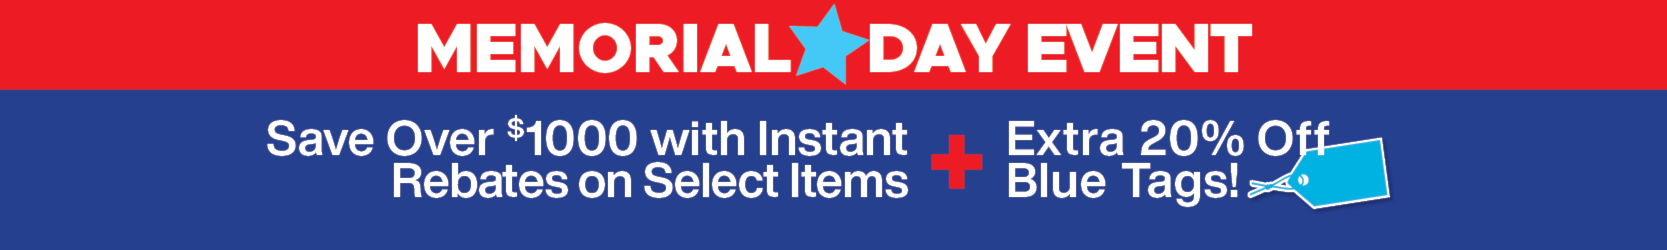 Memorial Day Event, Save $1000 with instant rebates on select items and save extra 20% off blut tags